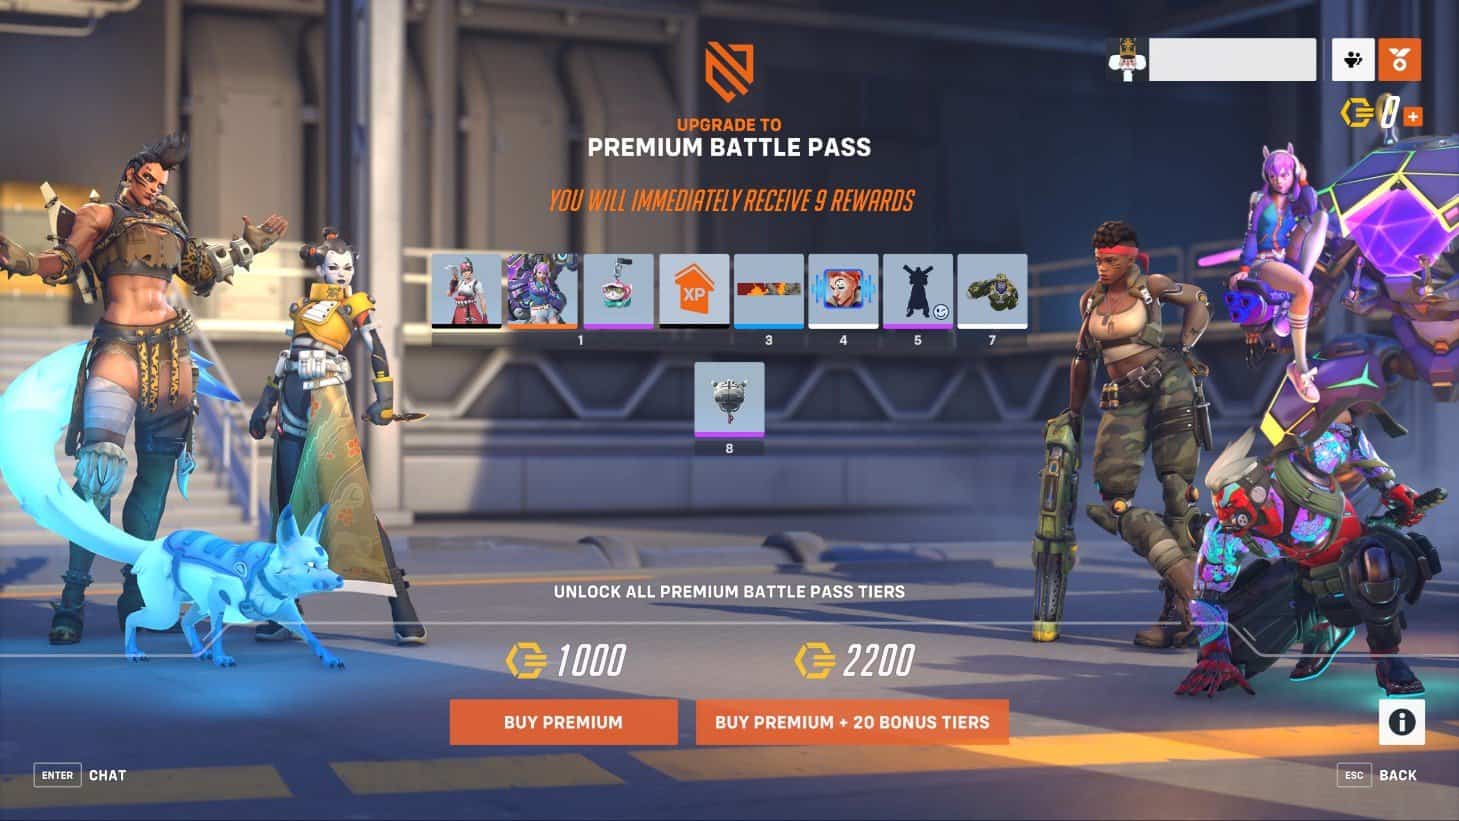 Is Overwatch 2 free to play? How to download Overwatch 2?